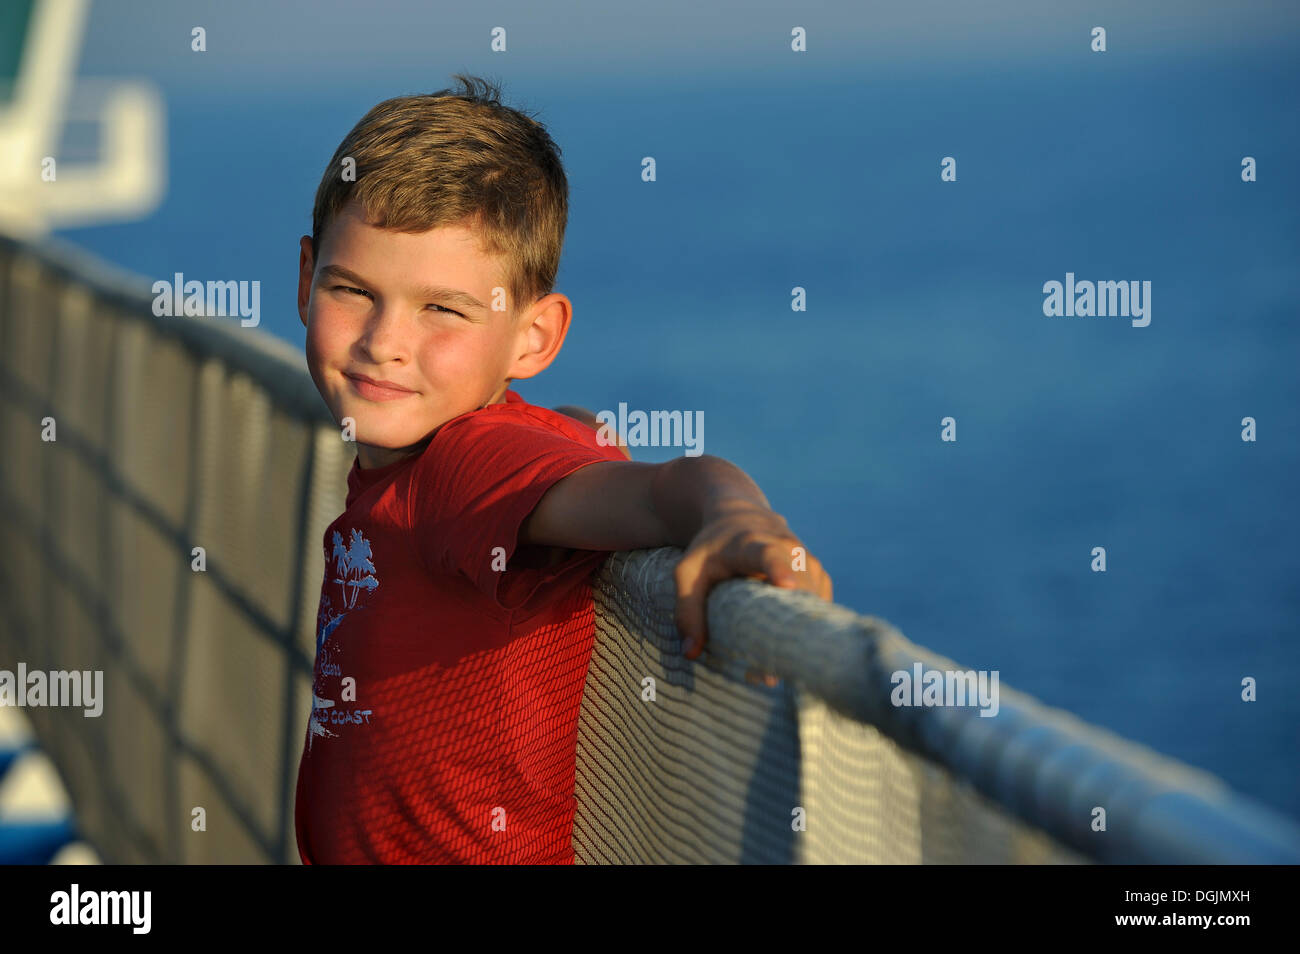 Boy, 8, leaning against a ship's railing Stock Photo